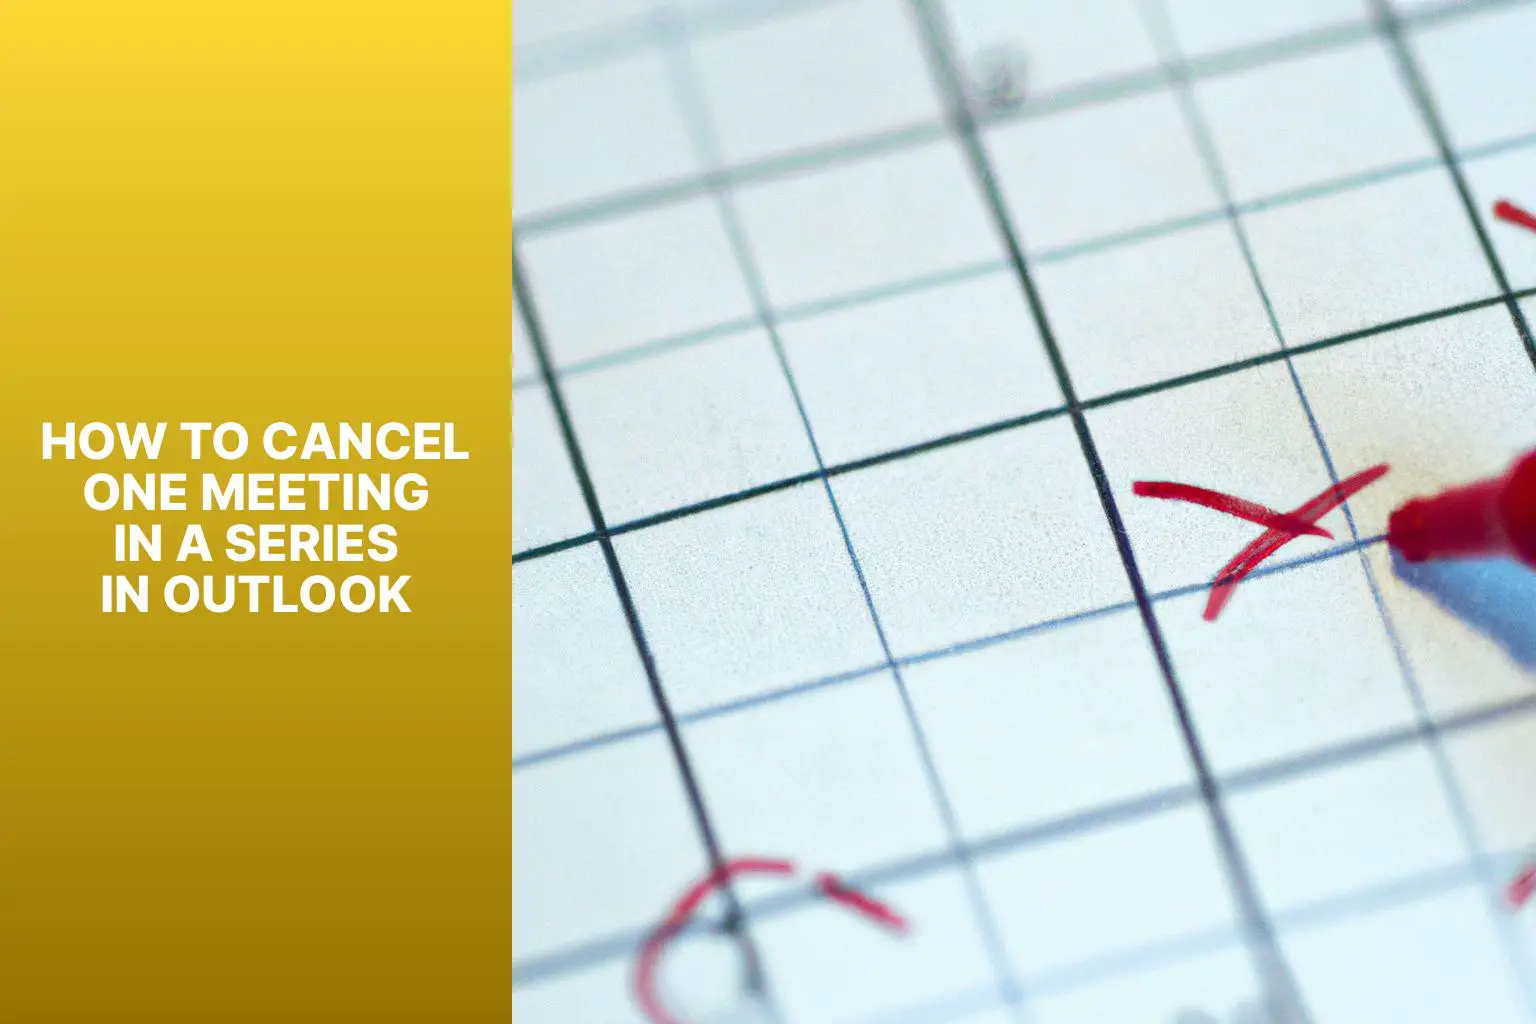 How to Cancel a Meeting in a Series in Outlook: Step-by-Step Guide